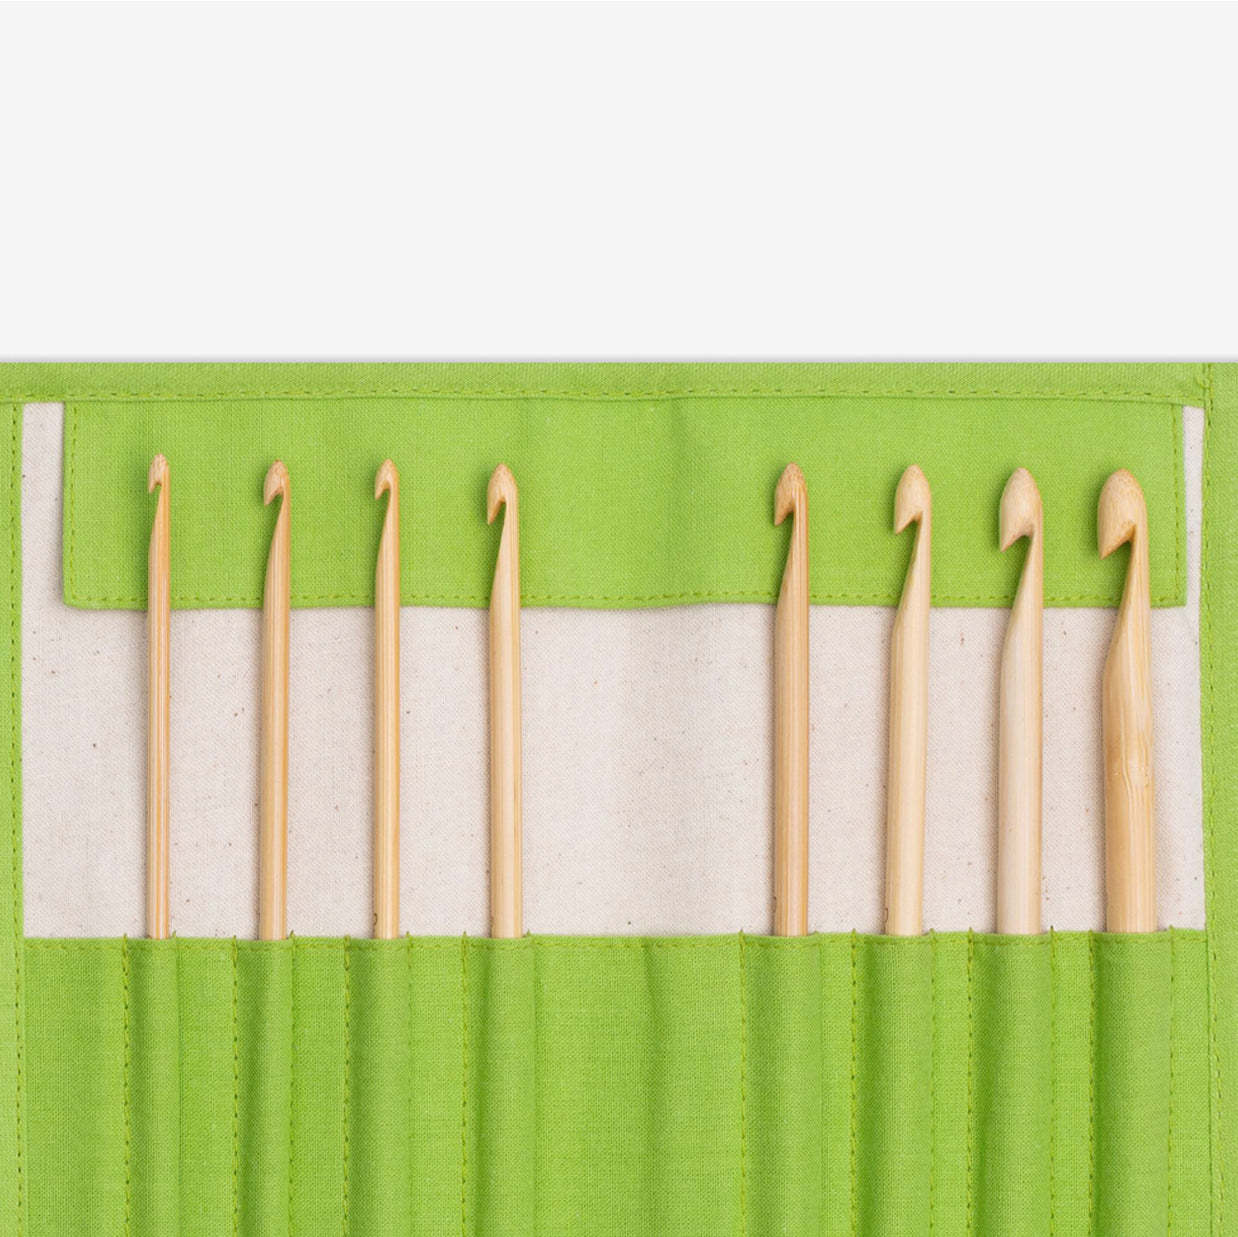 Prym 197610 Bamboo Crochet Hook Set: Softness and Quality for Your Crochet Projects